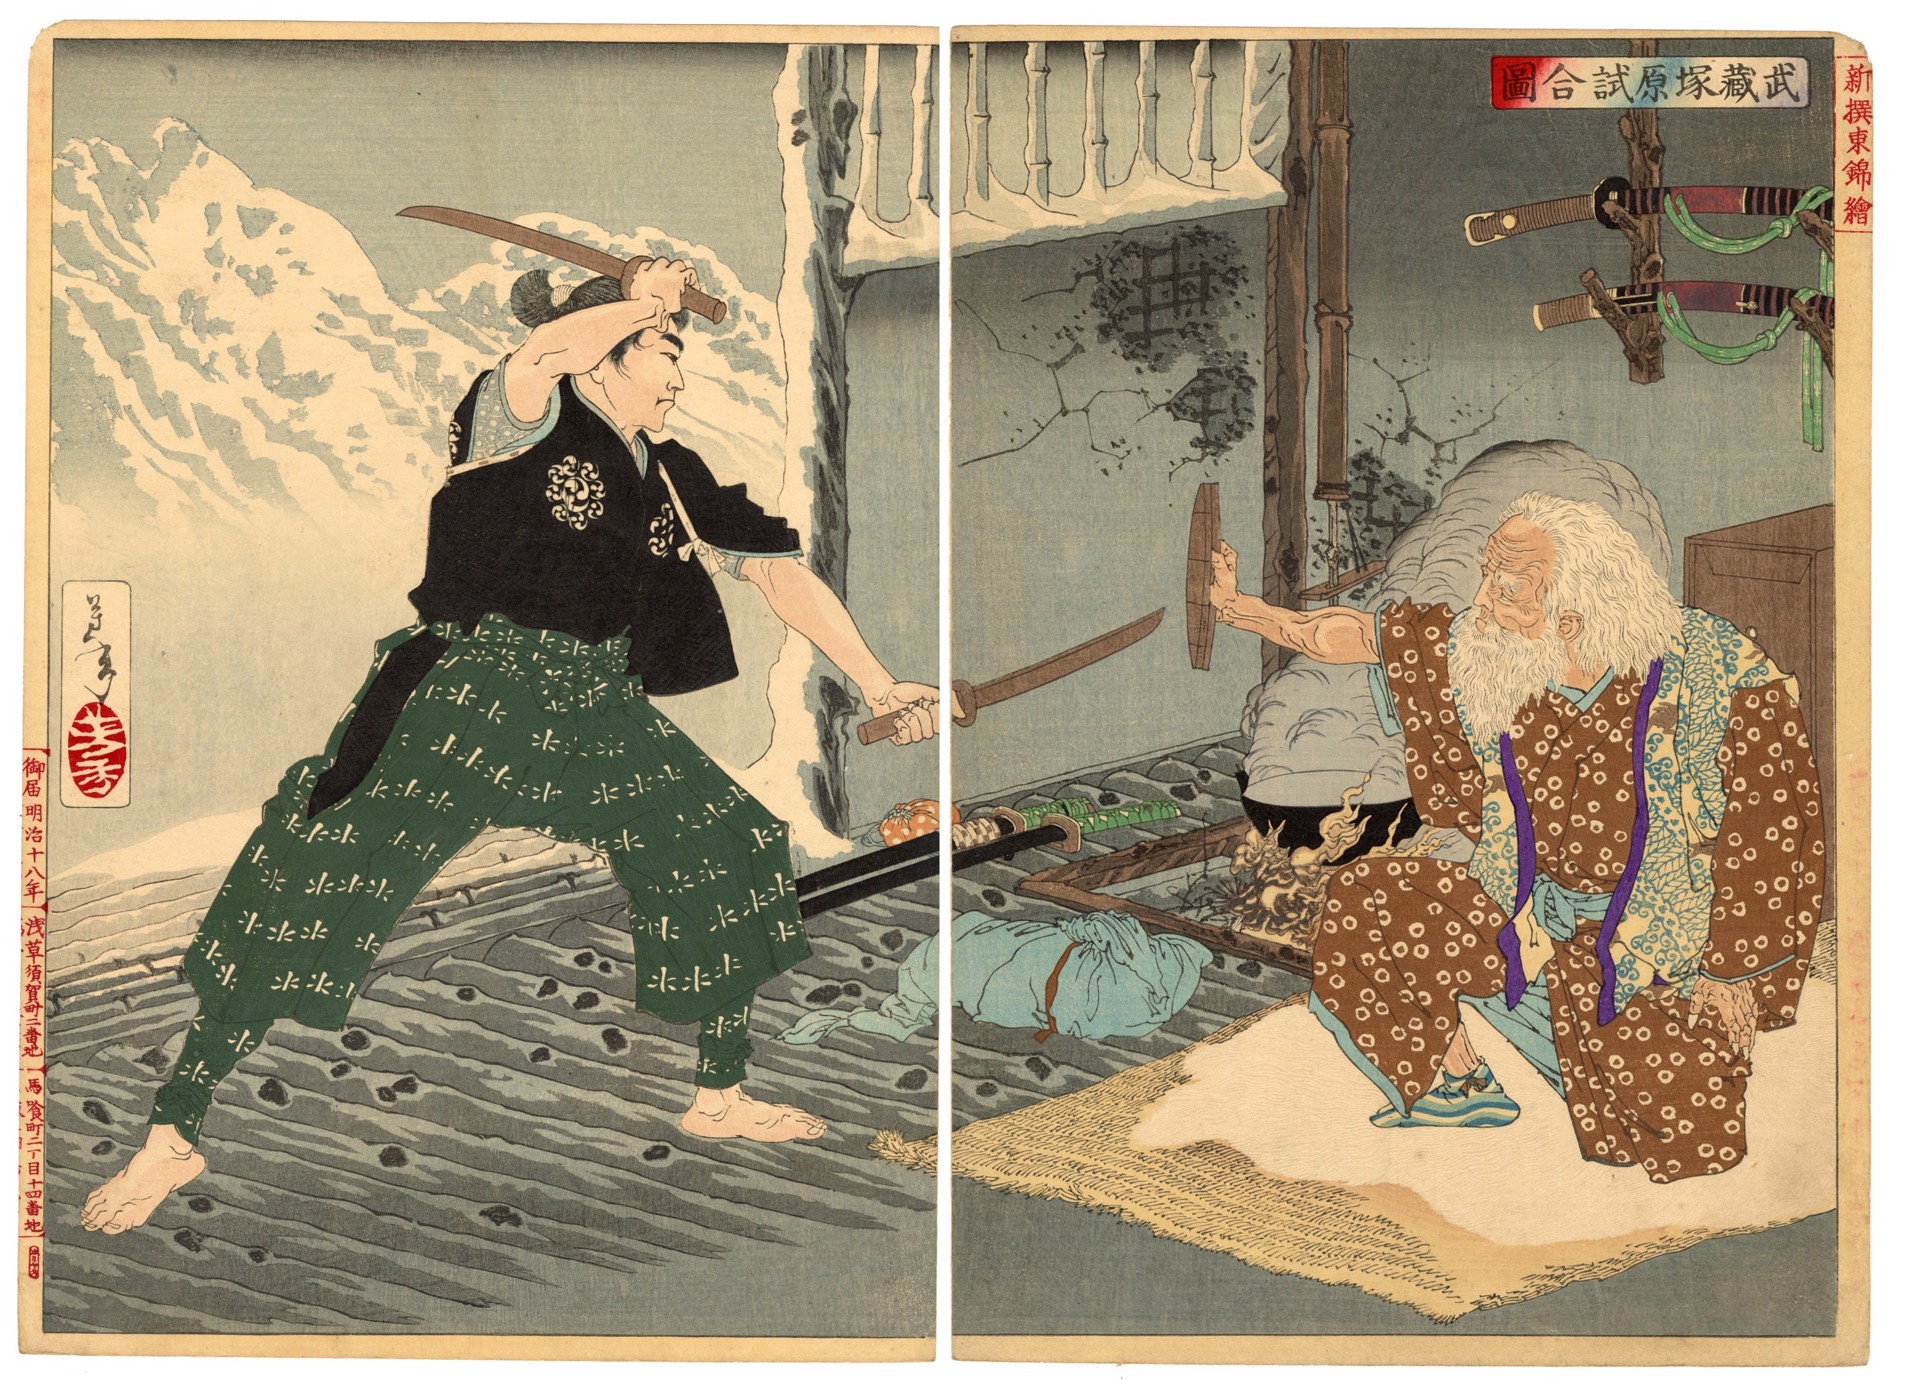 Duel Between Miyamoto Musashi, Holding Two Wooden Swords and the Old Master Tsukihara Bokuden, Who Uses awooden Pot Lid in Defense by Yoshitoshi